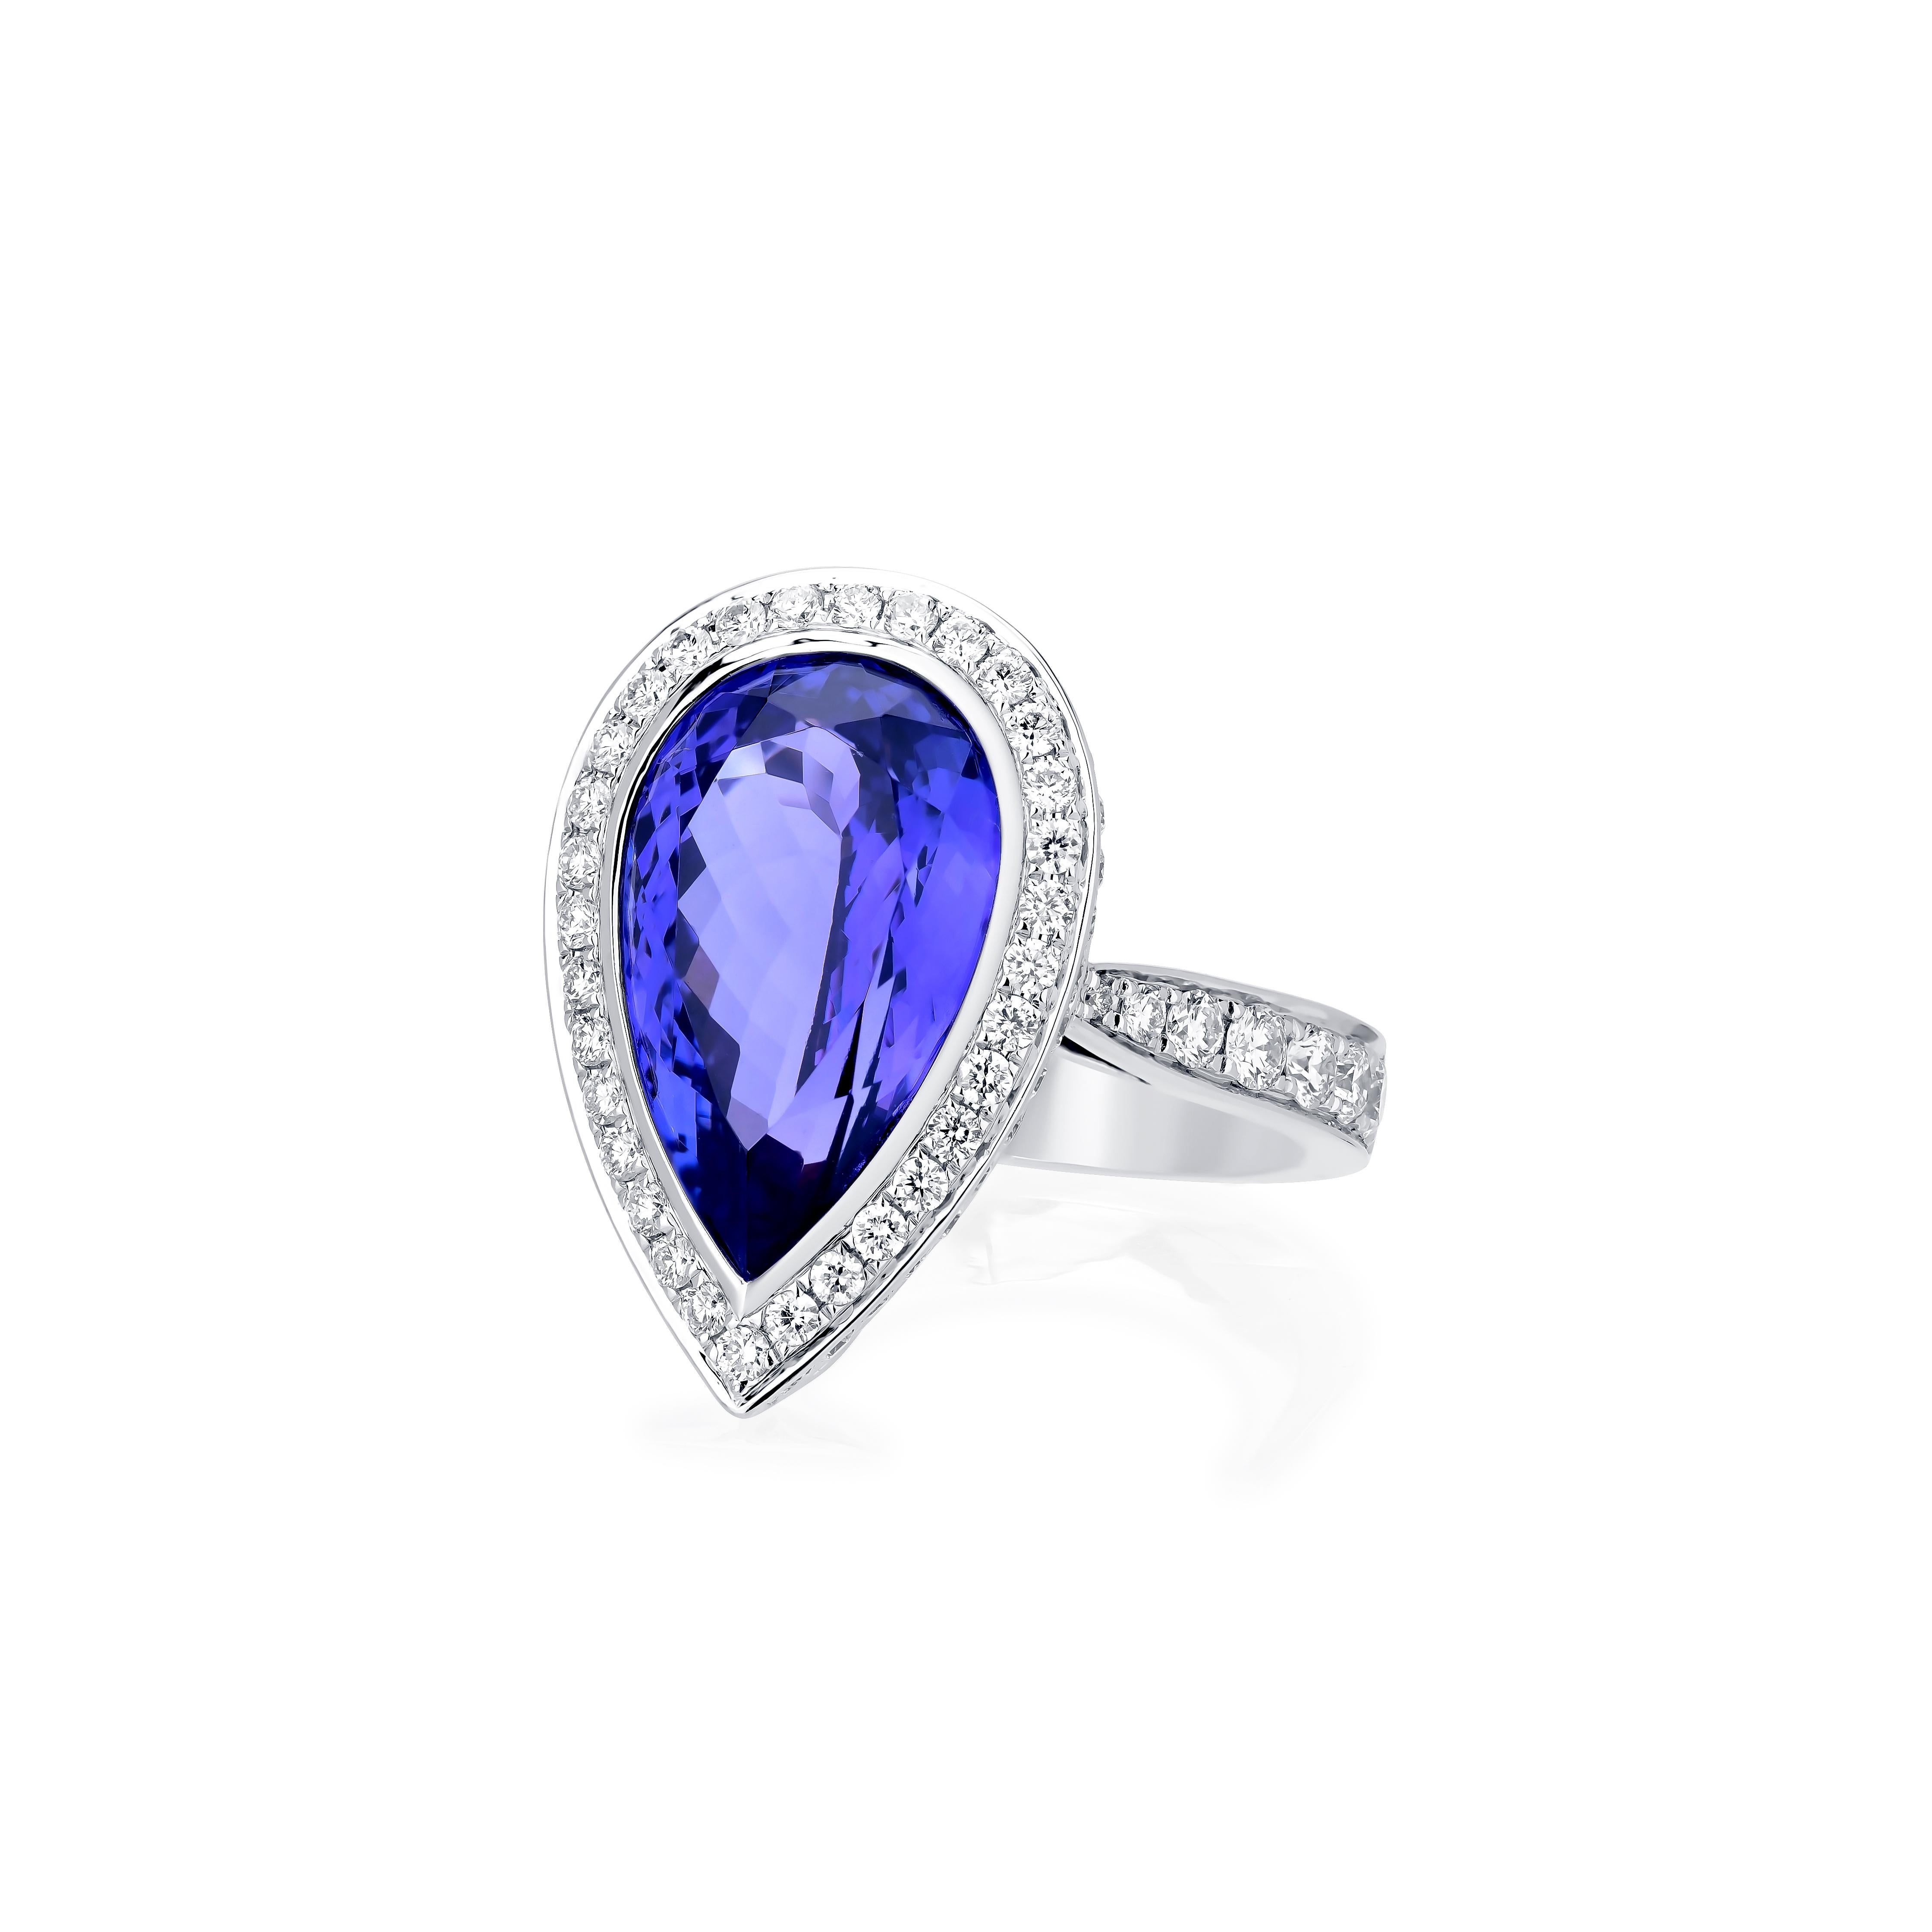 Nigaam 8.29cttw. Pear-Shaped Tanzanite and Diamond Halo Ring in 18k White Gold In New Condition For Sale In New York, NY